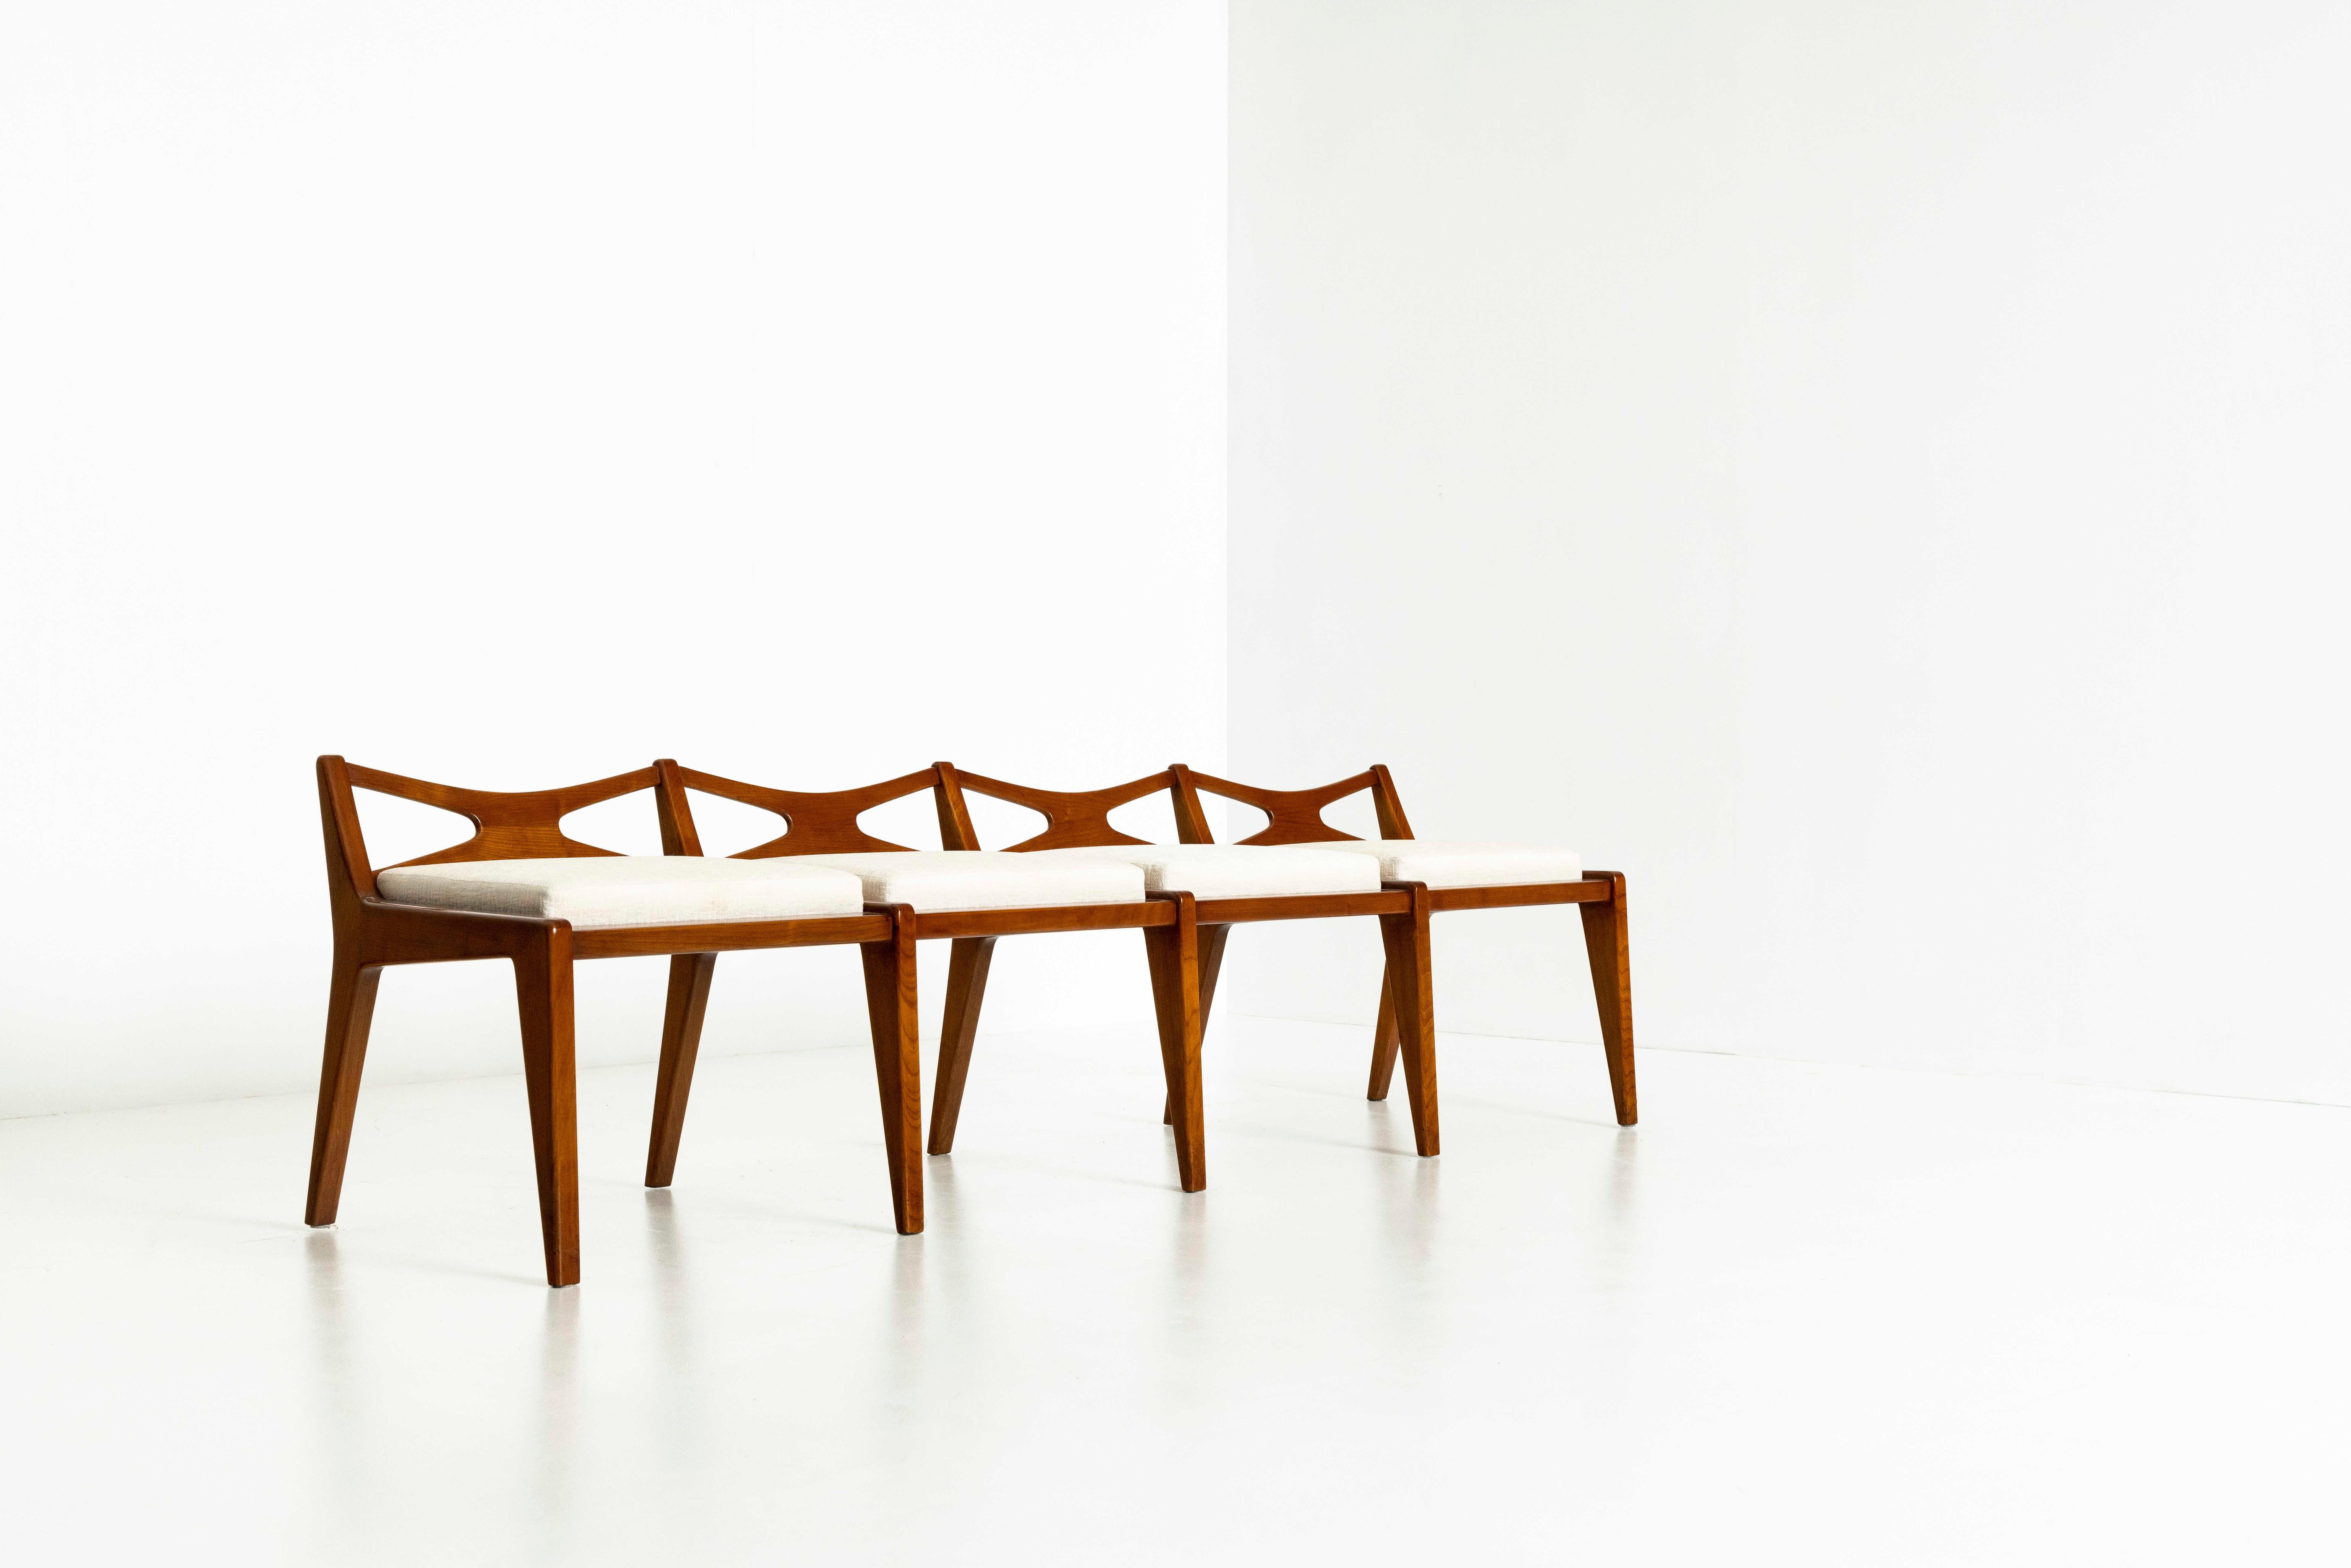 Unique Paolo Buffa bench in walnut and fabric from Italy, the 1950s. The combination of the warm wood color, the beautiful shapes, and the fabric makes this very attractive. Especially the design of the backrests and the legs is very elegant. The